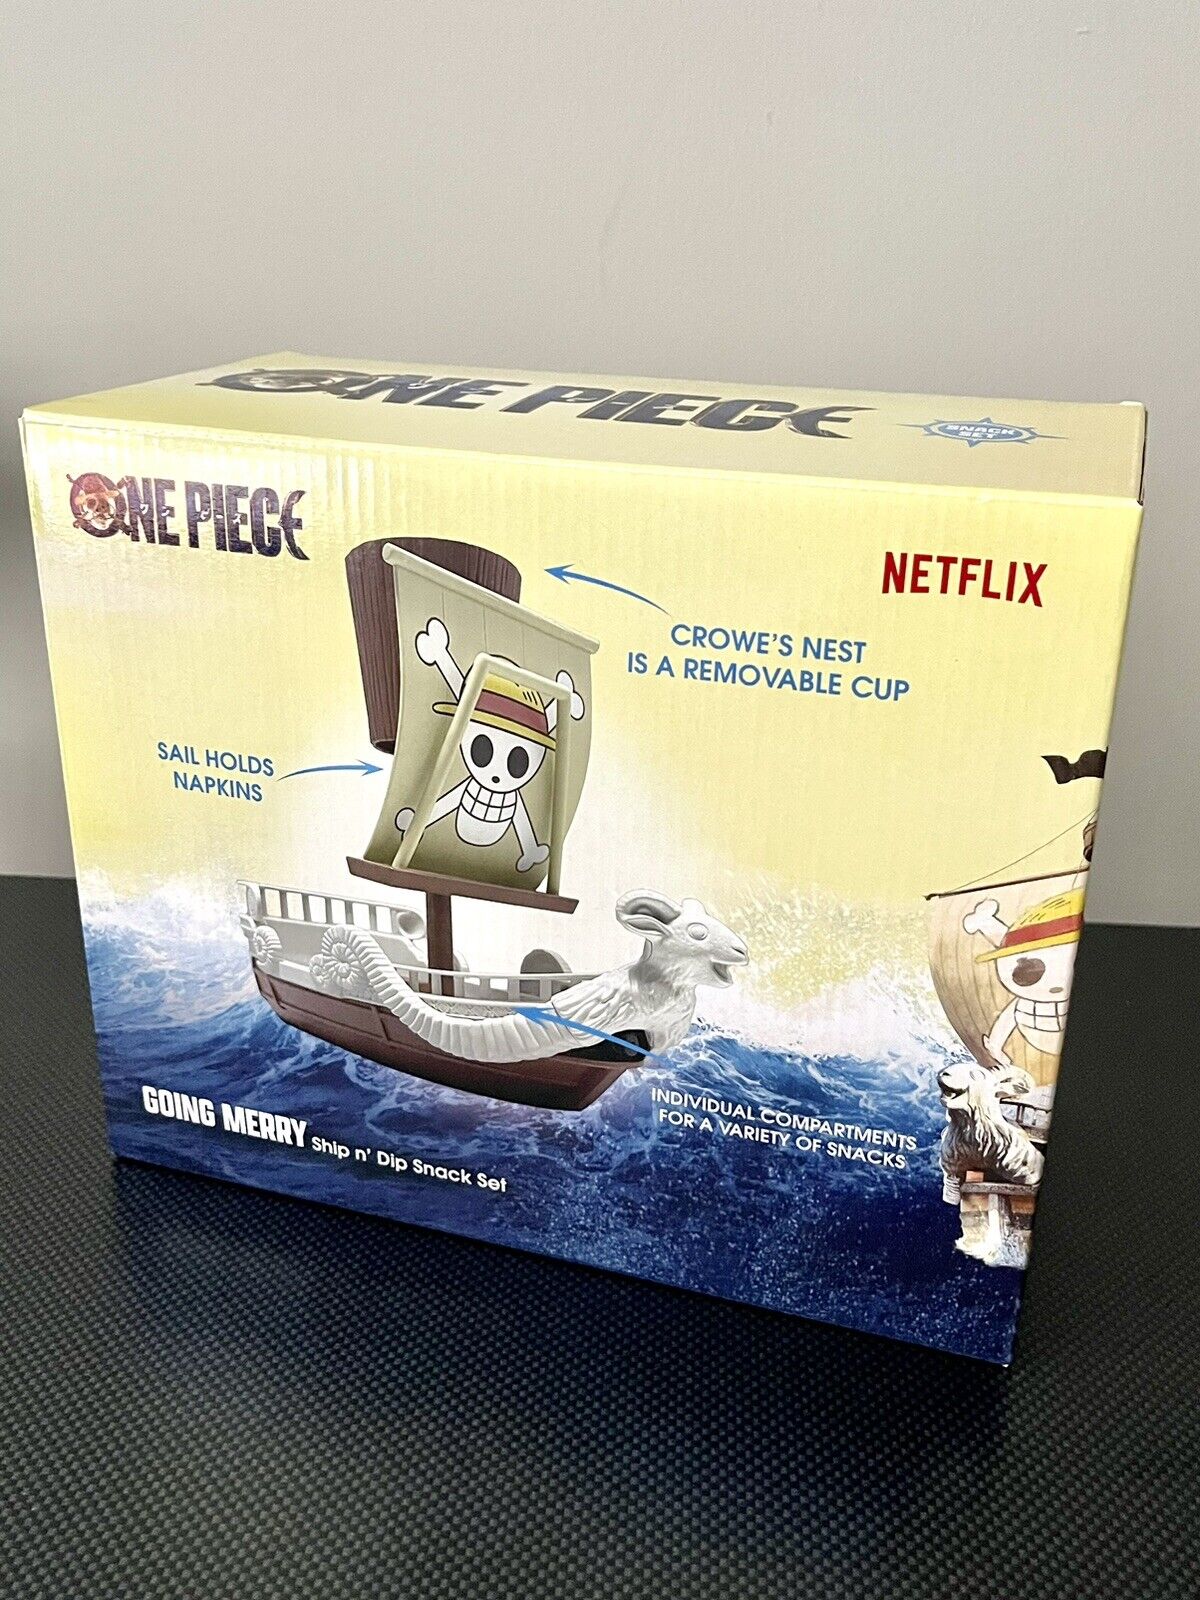 One Piece Anime Going Merry Ship N Dip Snack Set Netflix Collectors Brand New